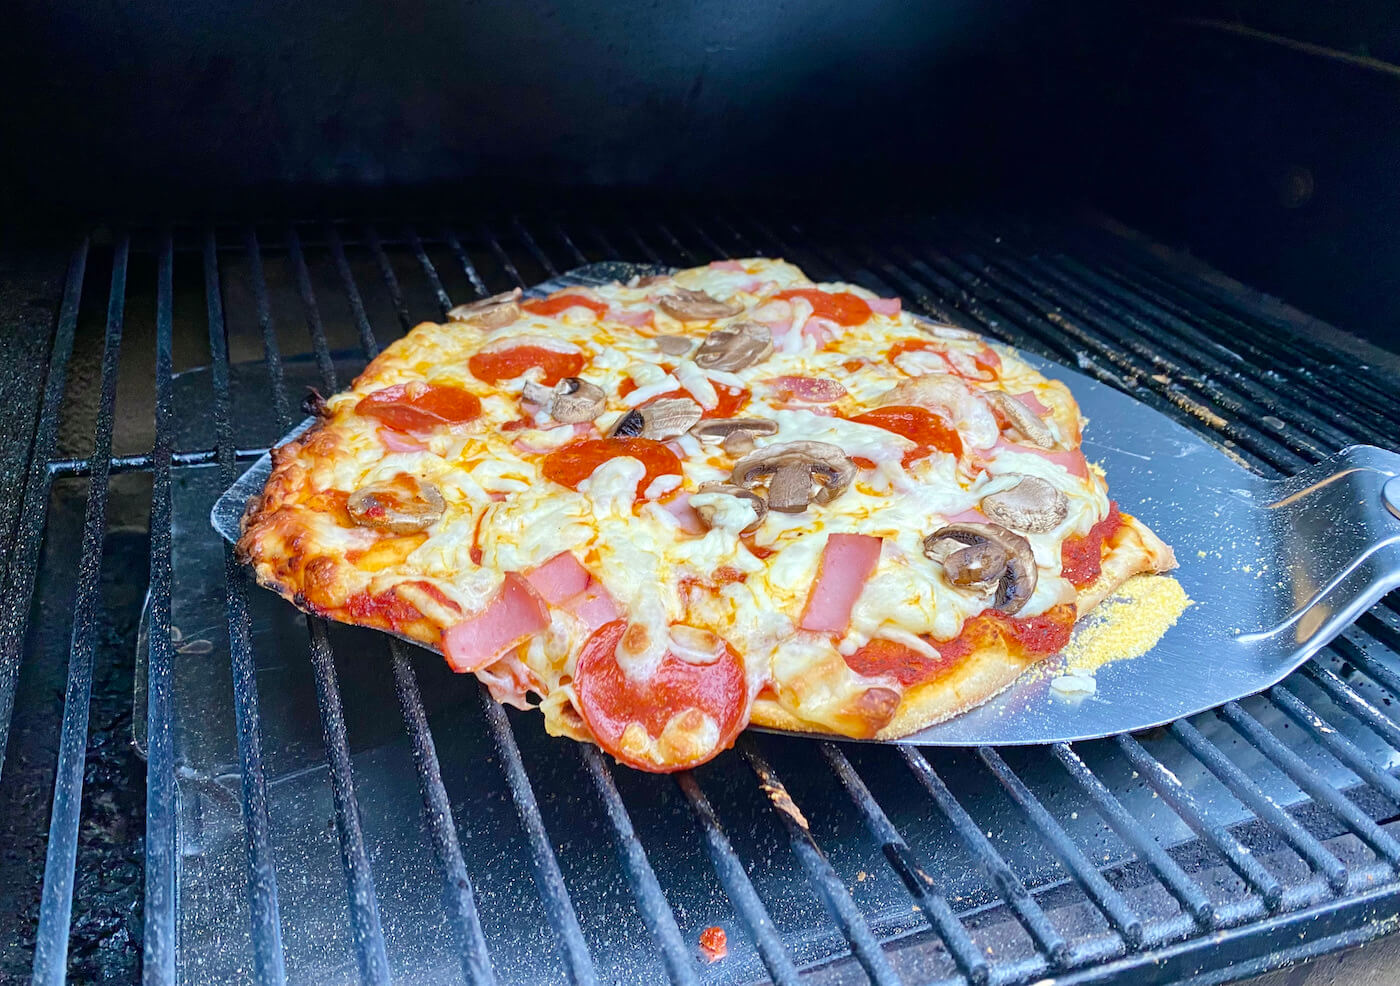 This photo shows a homemade pizza being lifted from a Traeger pellet grill with a pizza paddle.